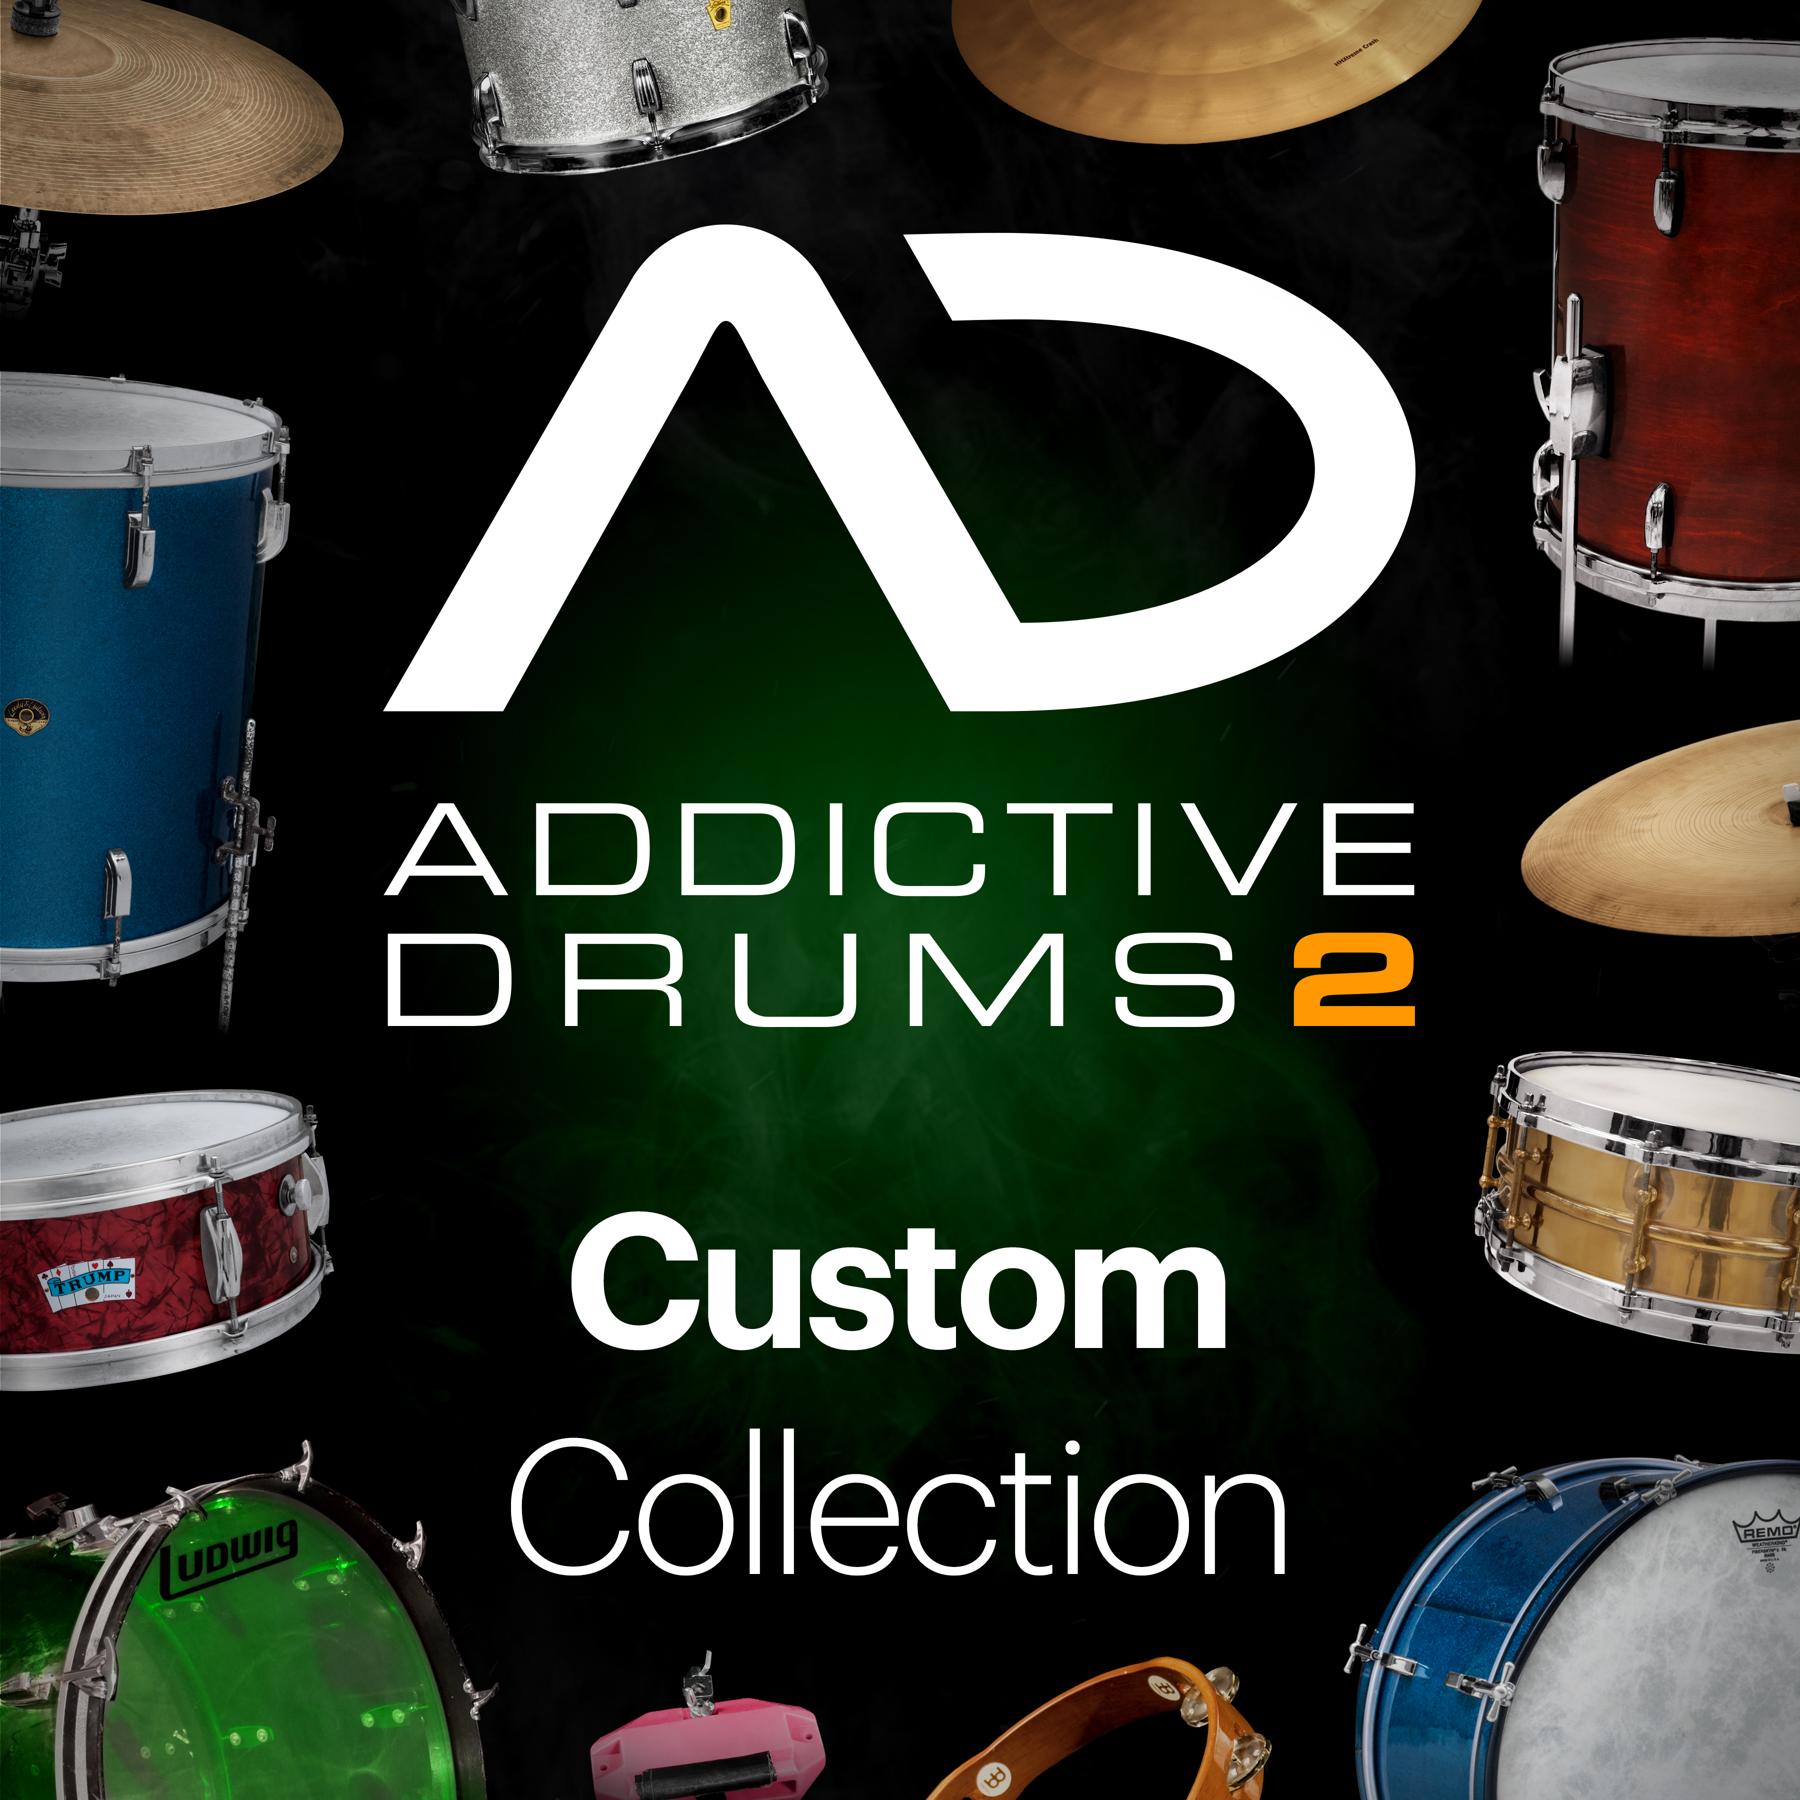 3. Addictive Drums 2 By XLN Audio